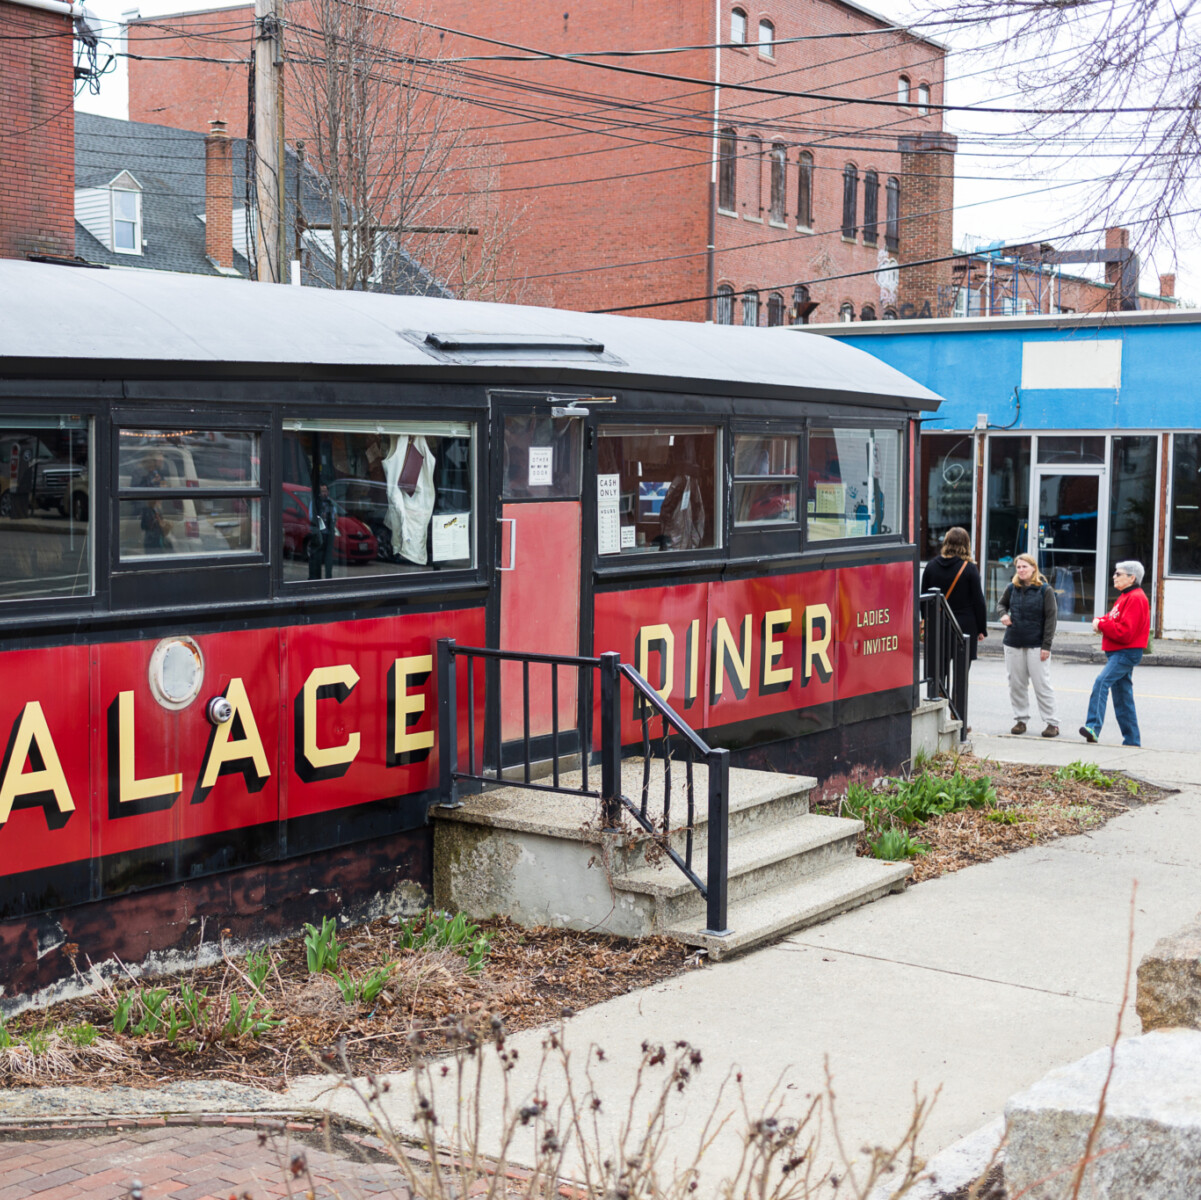 People stand outside an old railroad car that is home to a diner.